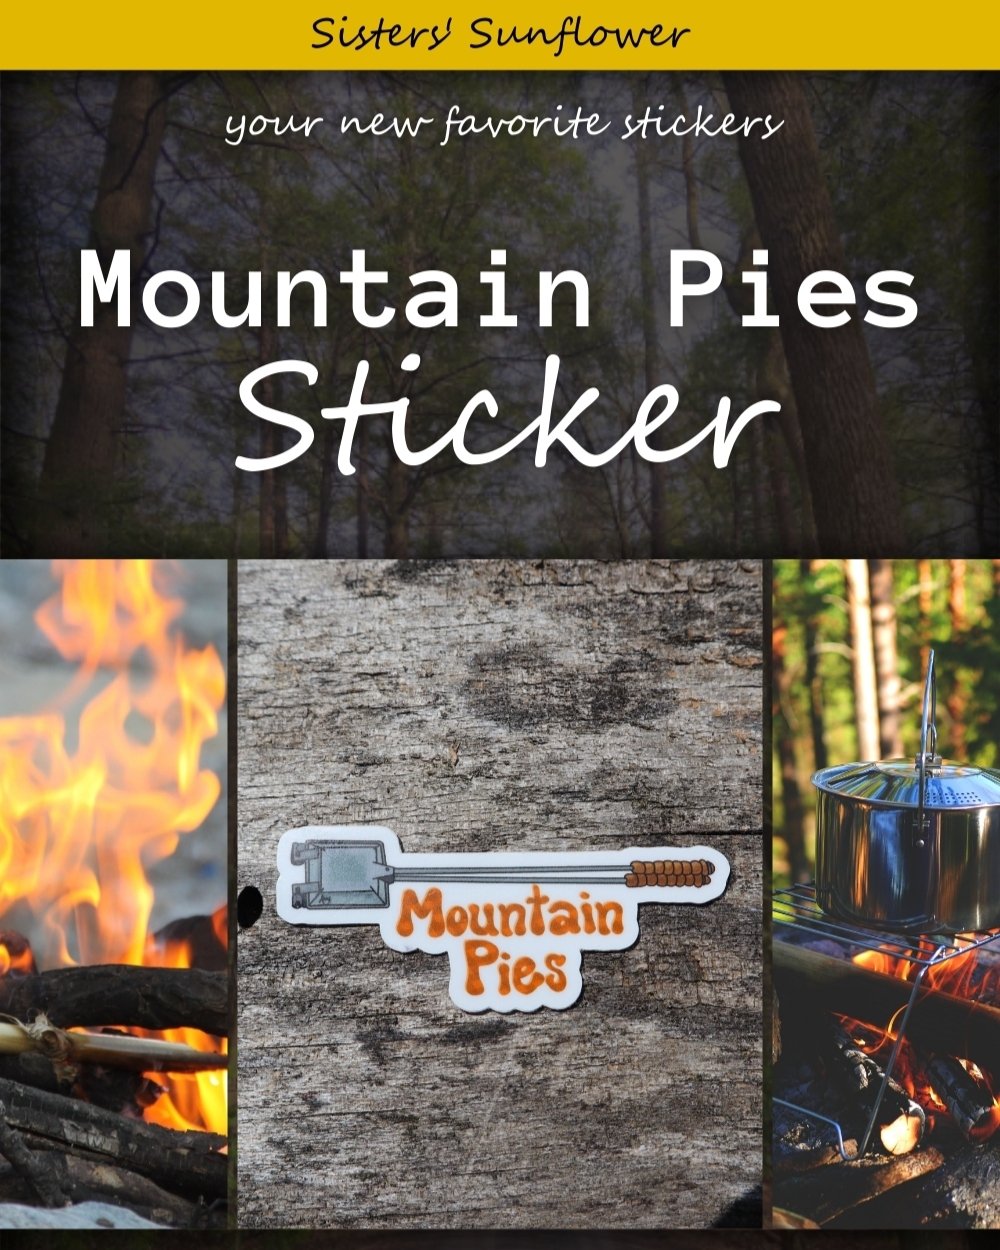 Mountain Pies Sticker!!

These are one of the best things to have when you&rsquo;re by the fire! If you don&rsquo;t have a mountain pie maker - I think it&rsquo;s worth the investment! There are so many possibilities for the flavors that you can have